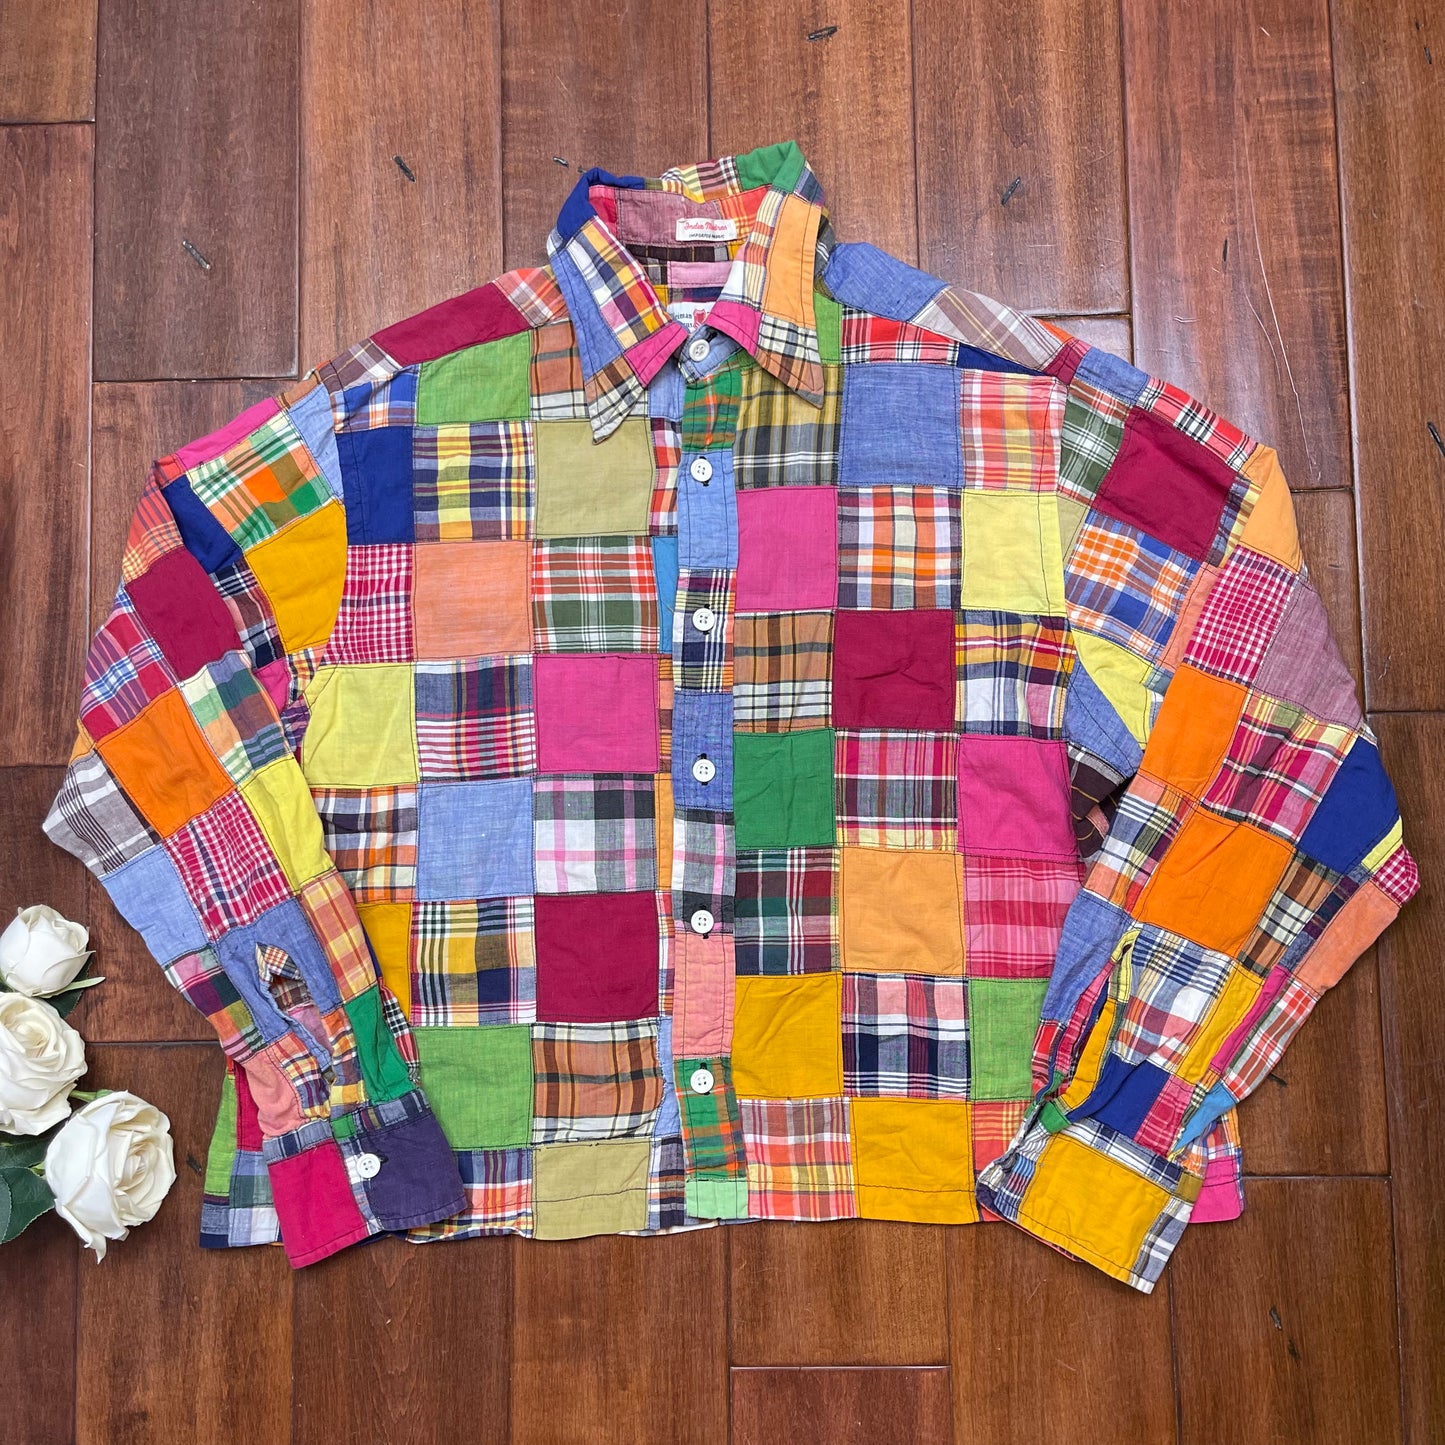 VINTAGE 80’S NEIMAN MARCUS CHECKERED PATCHWORK BUTTON-UP